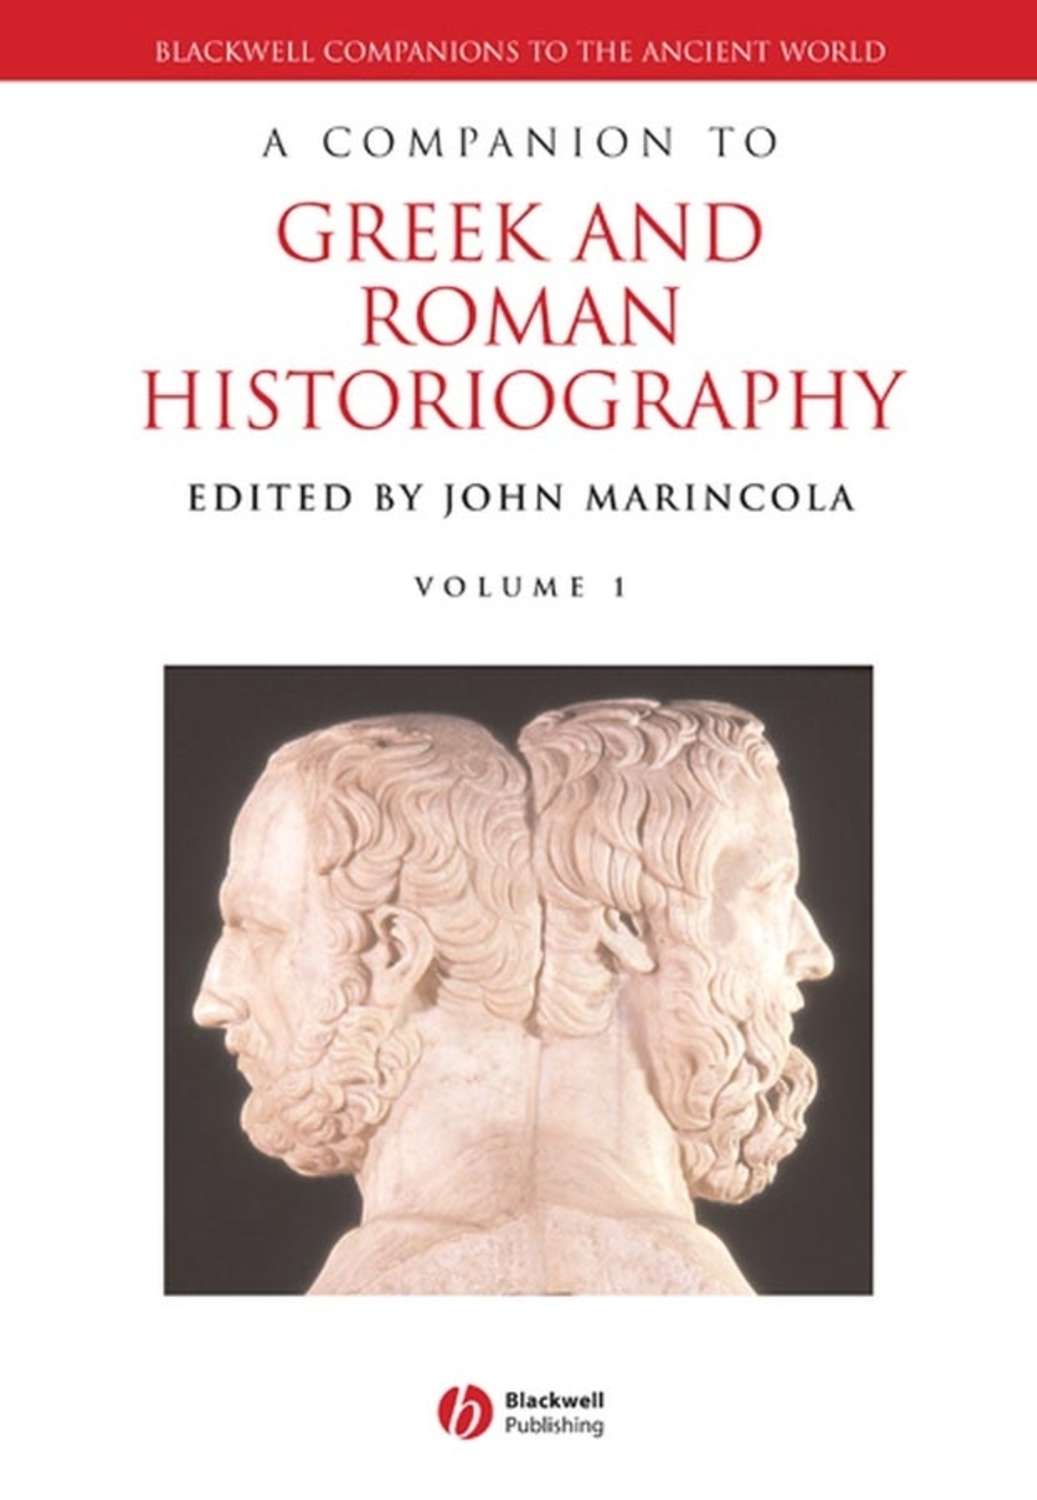 A Companion To Ancient Greek And Roman Music